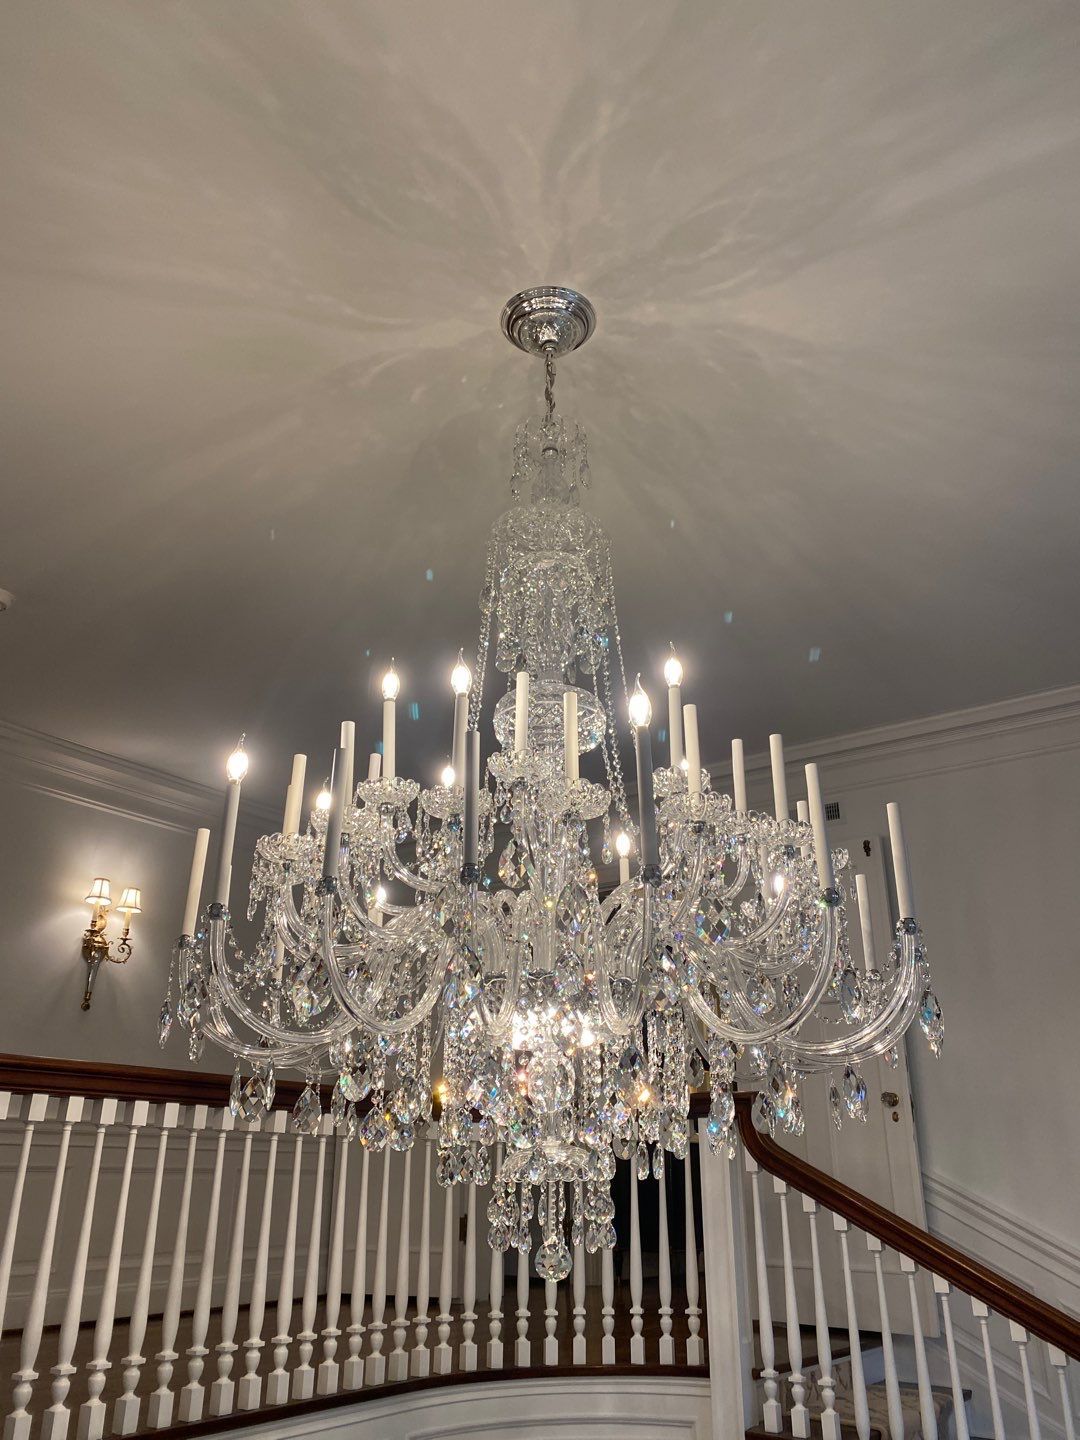 chandelier-and-lighting-installation-project-in-kansas-city-mo v18